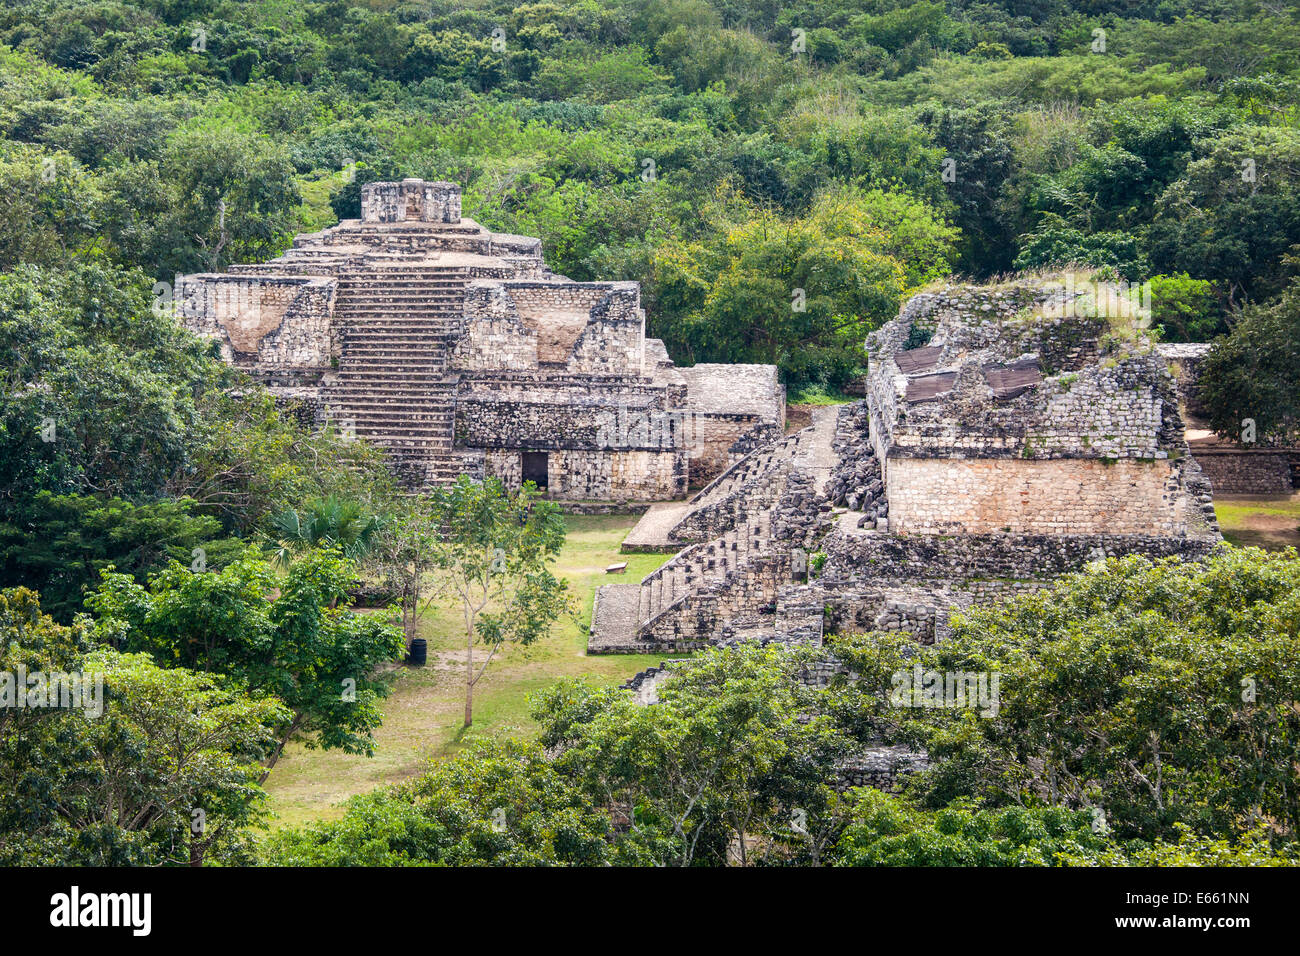 The Oval Palace as seen from atop the Acropolis at Ek Balam, Yucatan, Mexico. Stock Photo